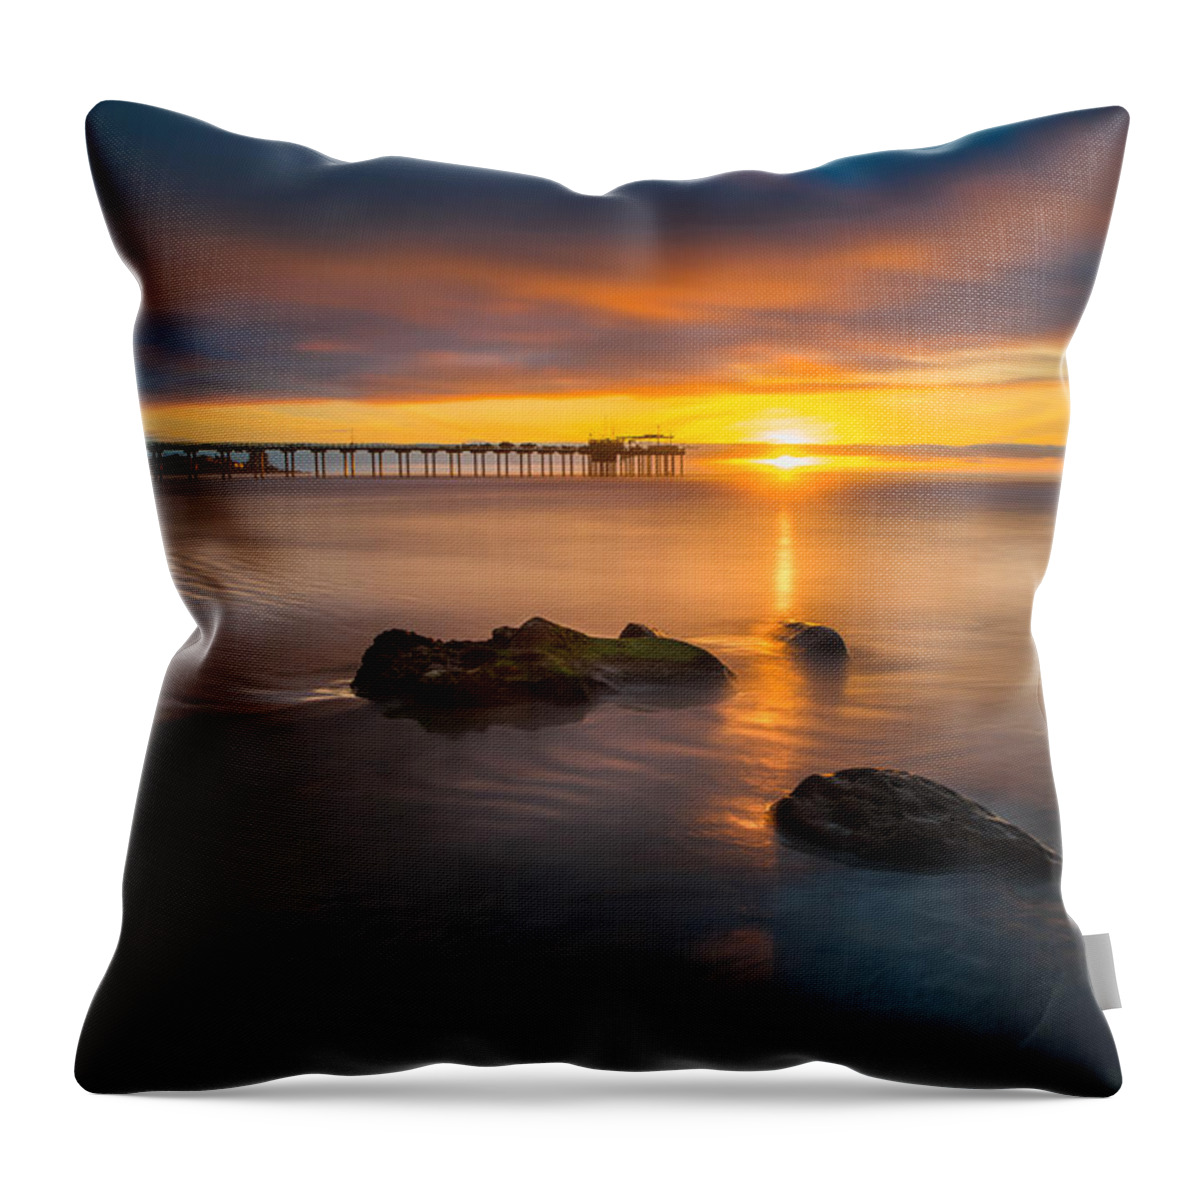 California; Long Exposure; Ocean; Reflection; San Diego; Seascape; Sky; Sunset; Clouds Throw Pillow featuring the photograph Scripps Pier Sunset 2 by Larry Marshall